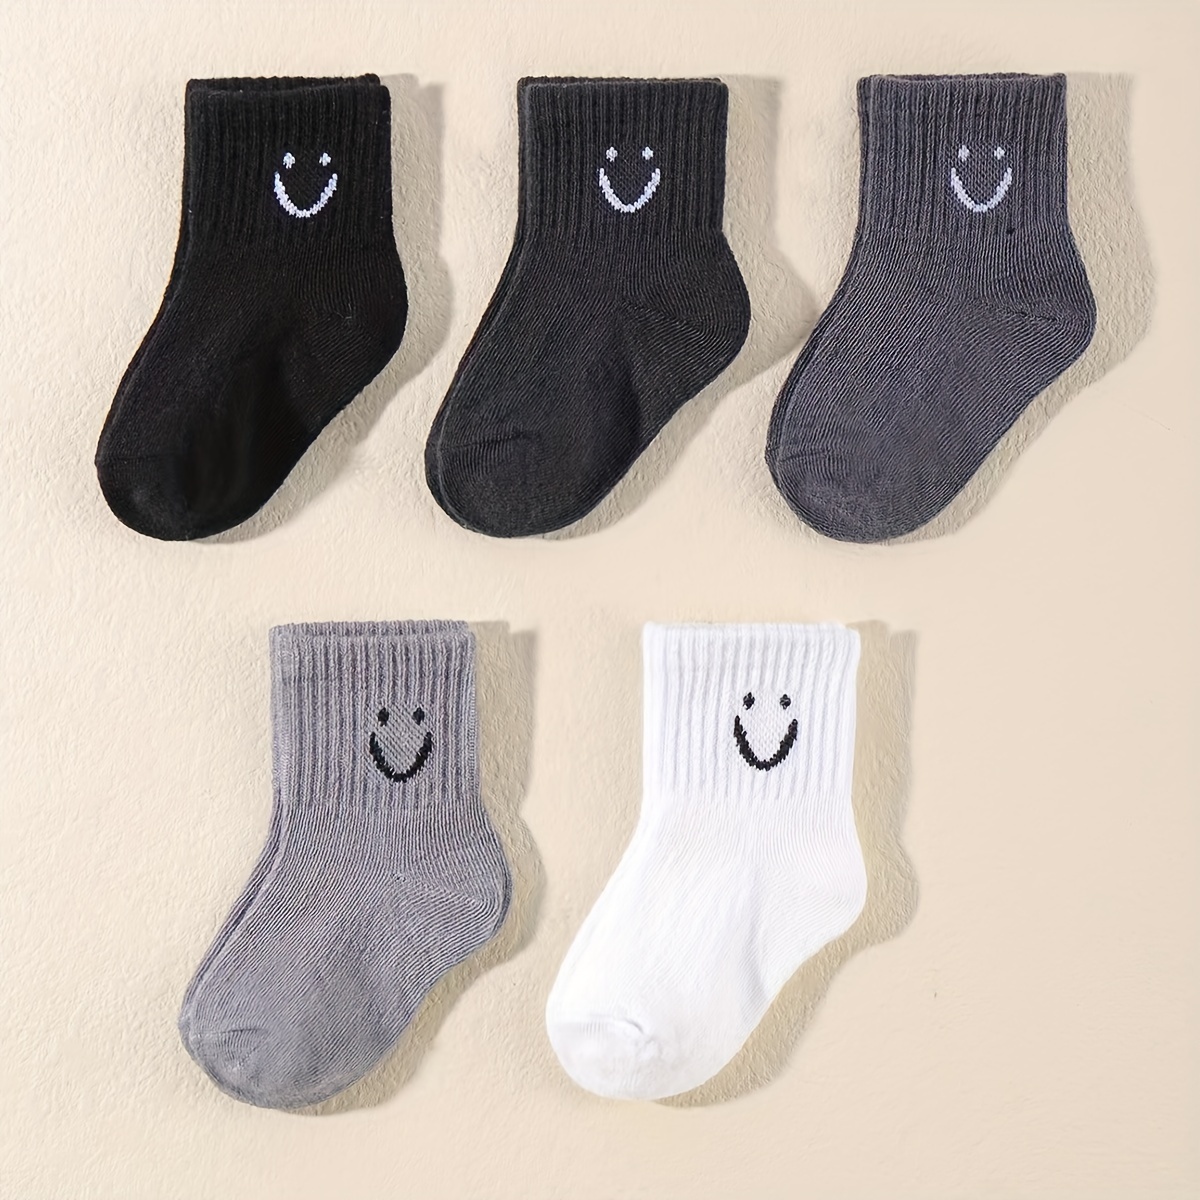 

5 Pairs Of Kid's Fashion Cute Happy Expression Pattern Crew Socks, Comfy & Breathable Soft & Elastic Thin Socks For Spring And Summer